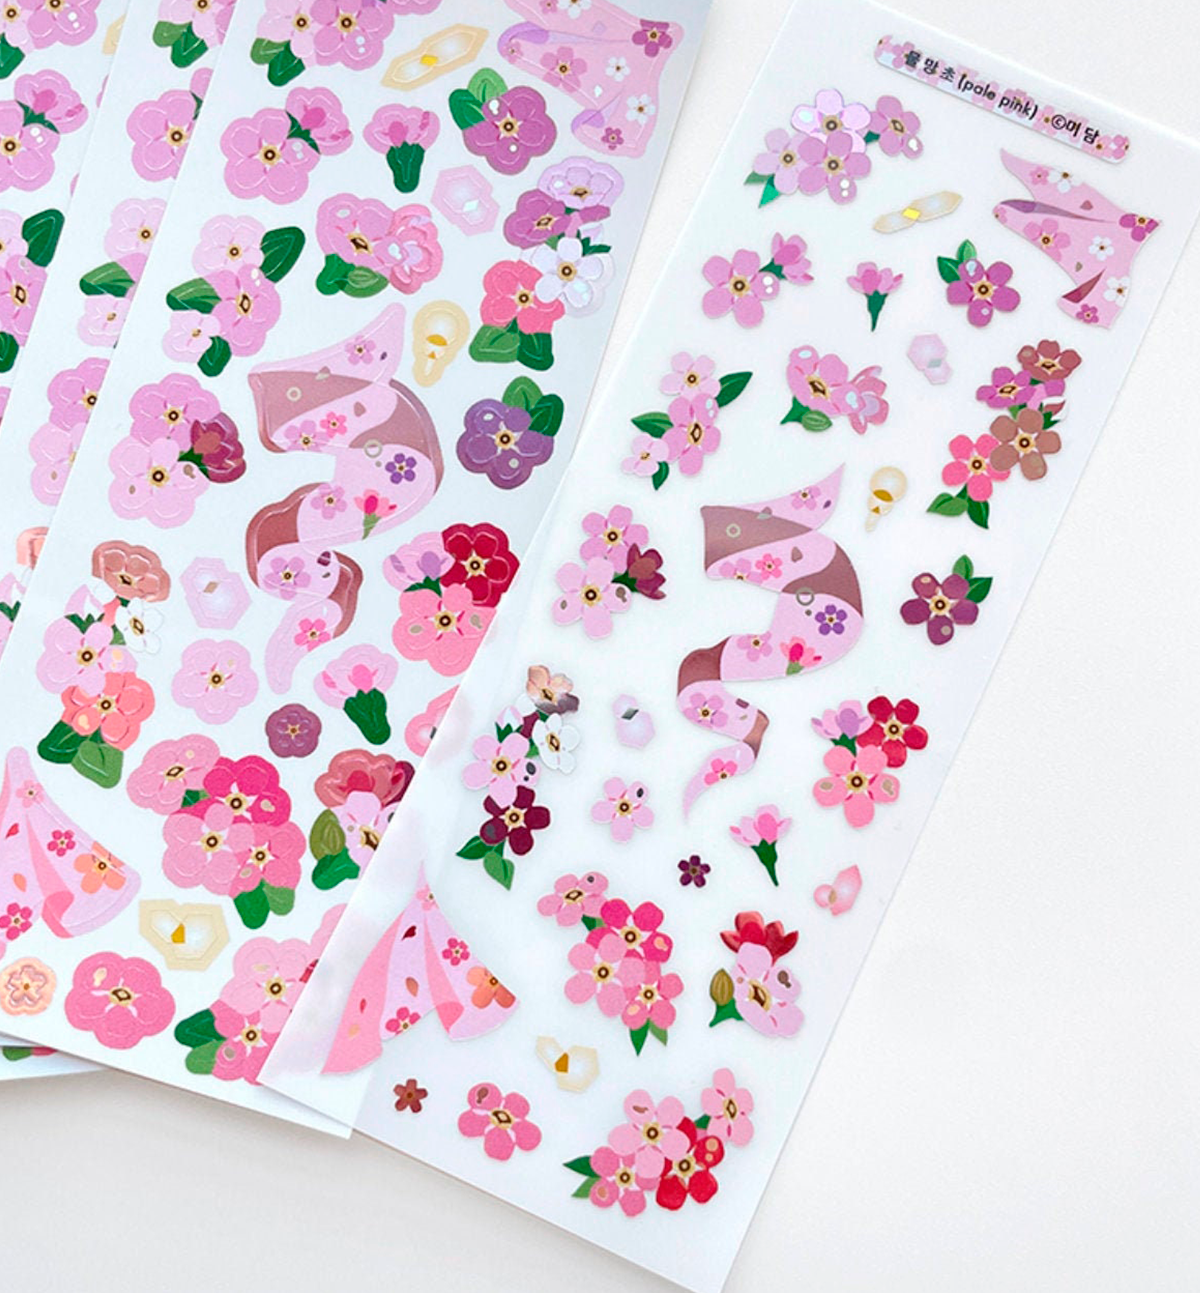 Forget-Me-Not Seal Sticker [Pale Pink]